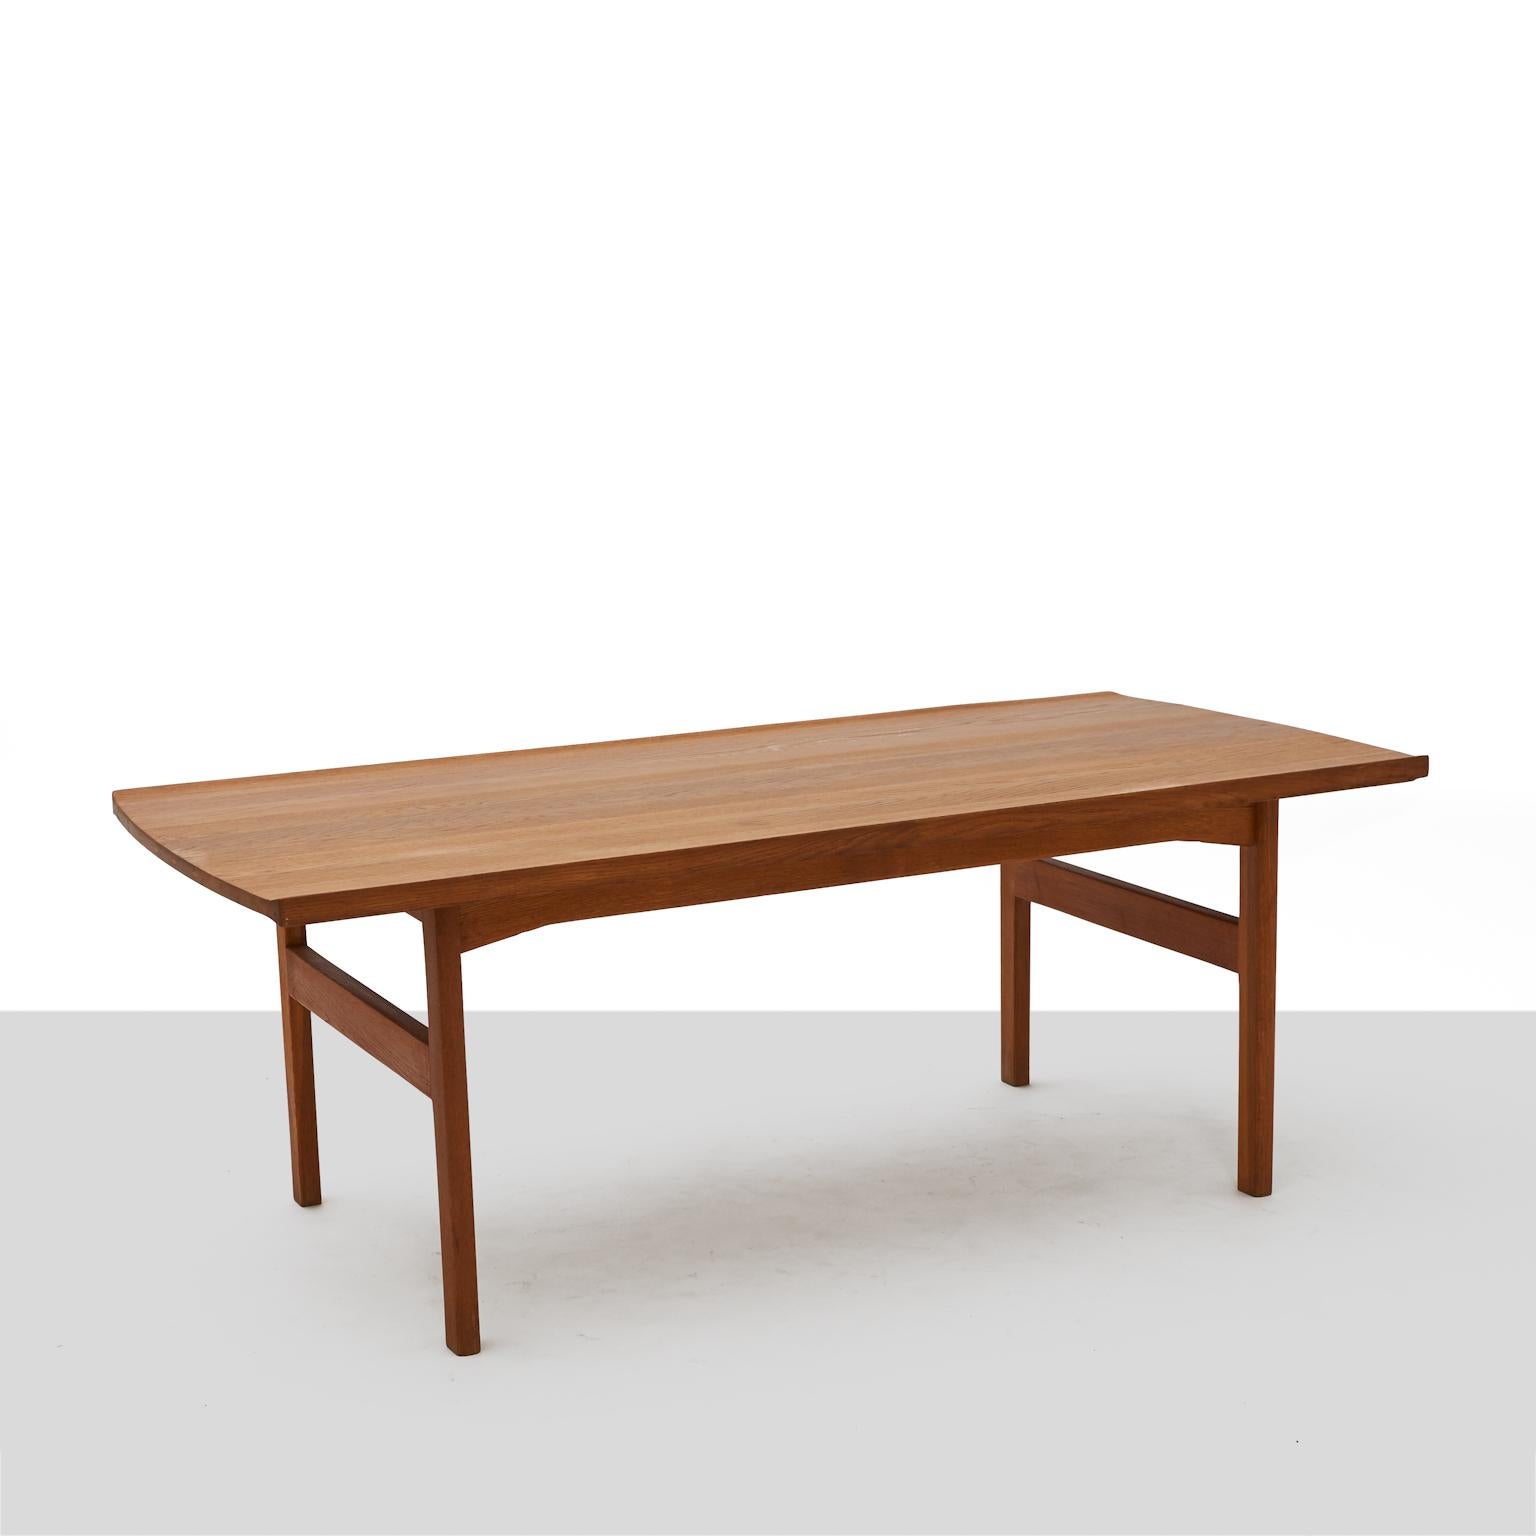 A coffee table of solid teak with upturned edges running the length of the table by Tove & Edvard Kindt-Larsen. Manufactured by and marked for AB Seffle Furniture.